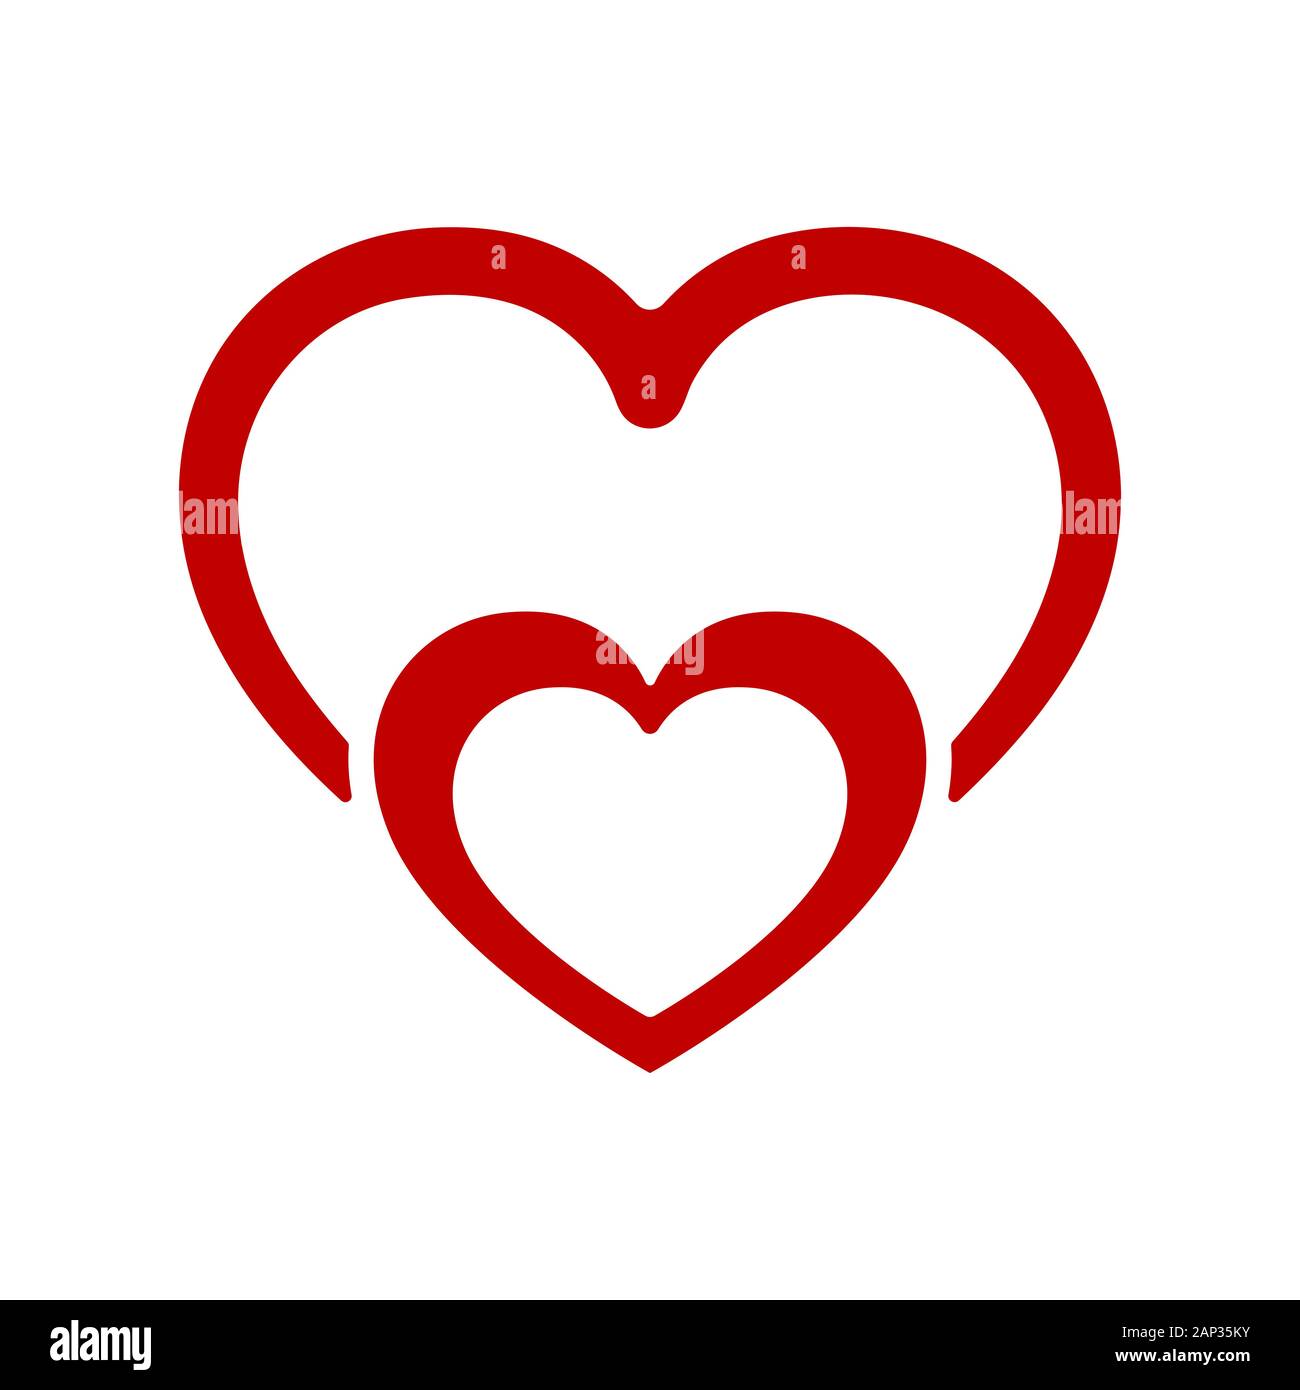 Abstract heart shape outline. Vector illustration. Red heart icon in flat style. The heart as a symbol of love. Stock Vector